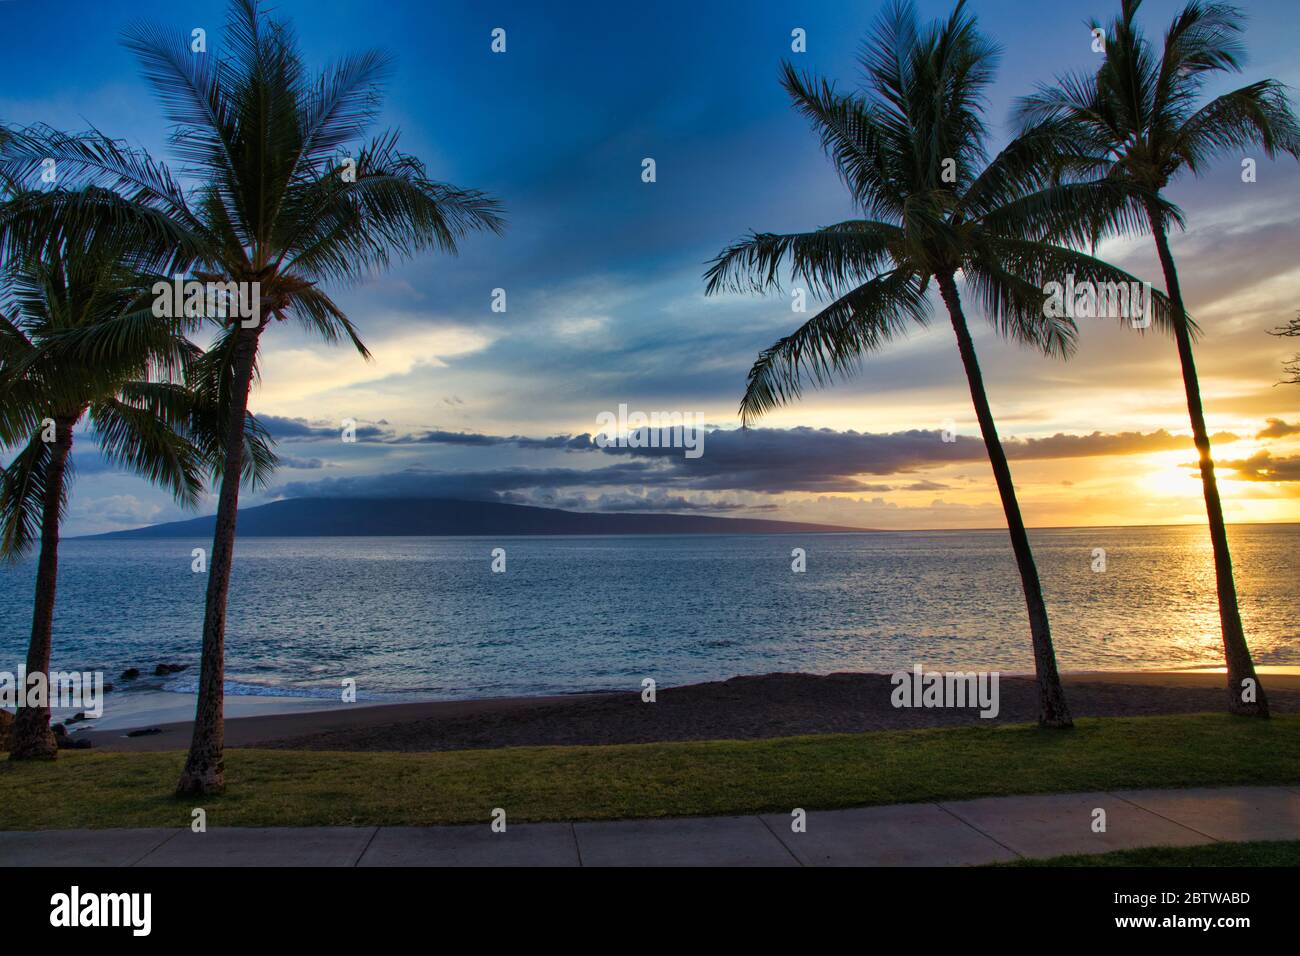 Tropical palm trees and island view at dusk. Stock Photo